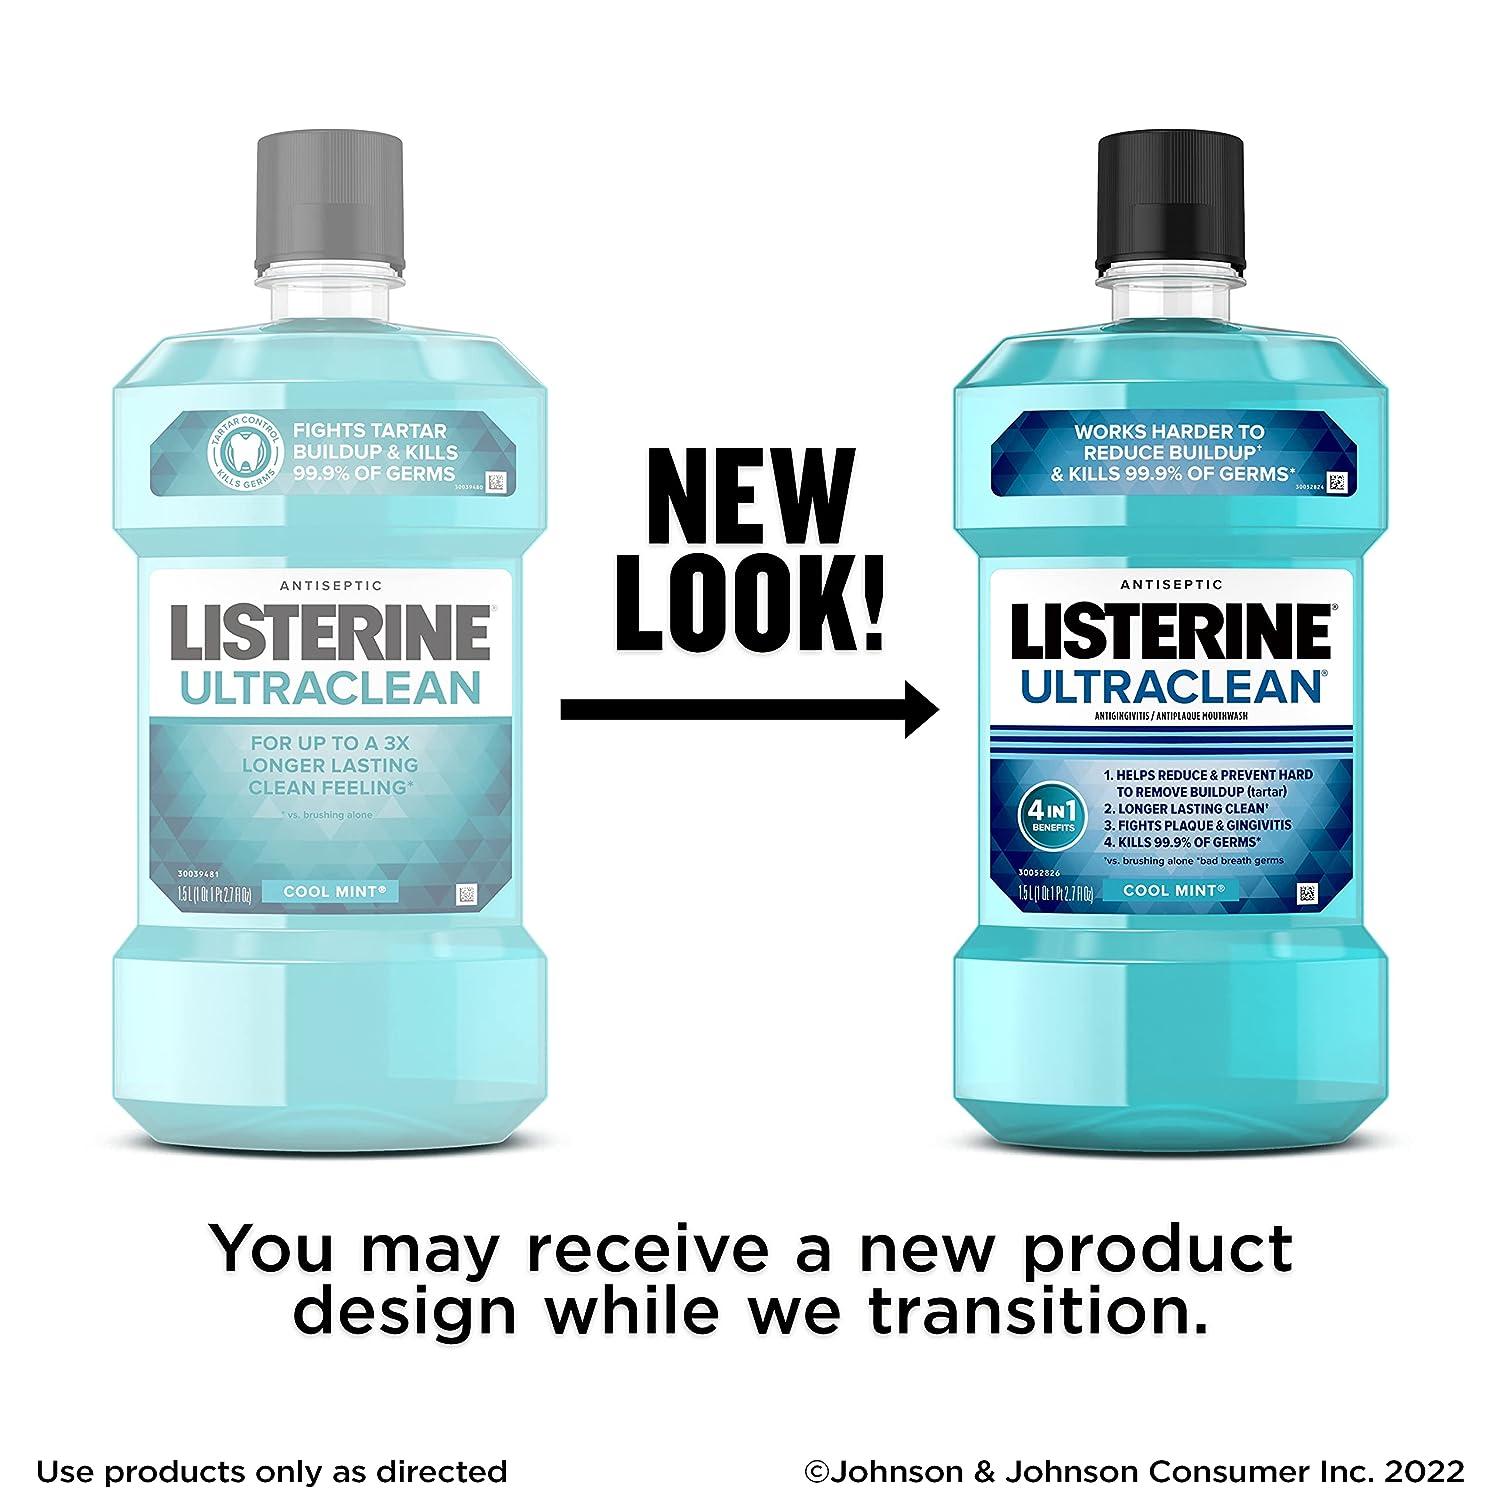 Listerine Cool Mint Antiseptic Mouthwash for Bad Breath - 1.5 L